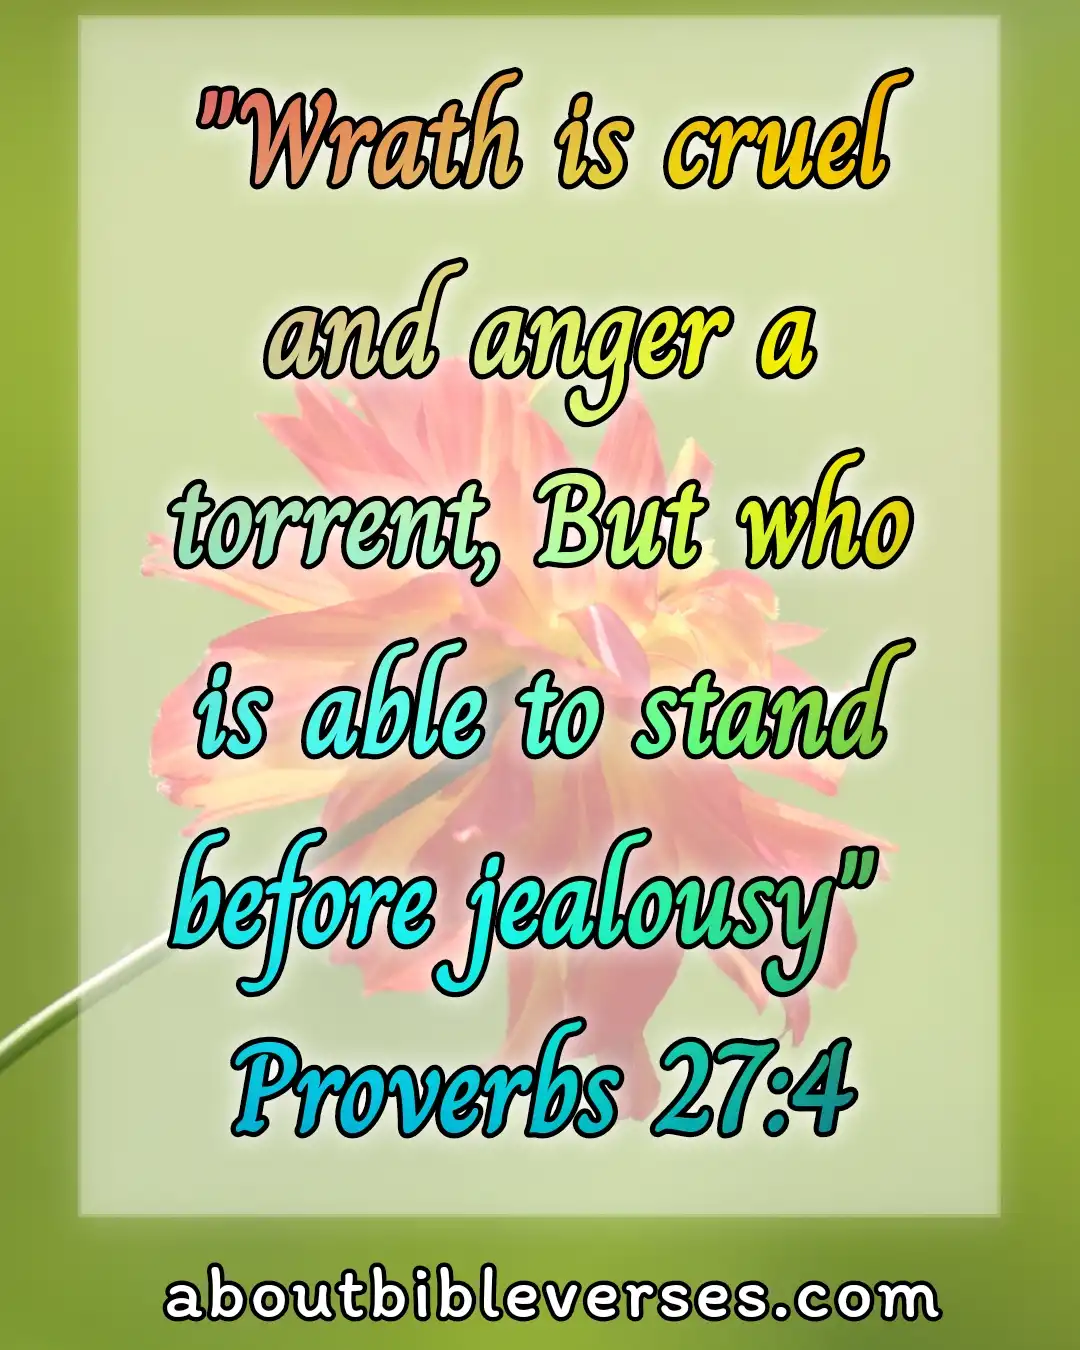 bible verses about jealousy and envy (Proverbs 27:4)